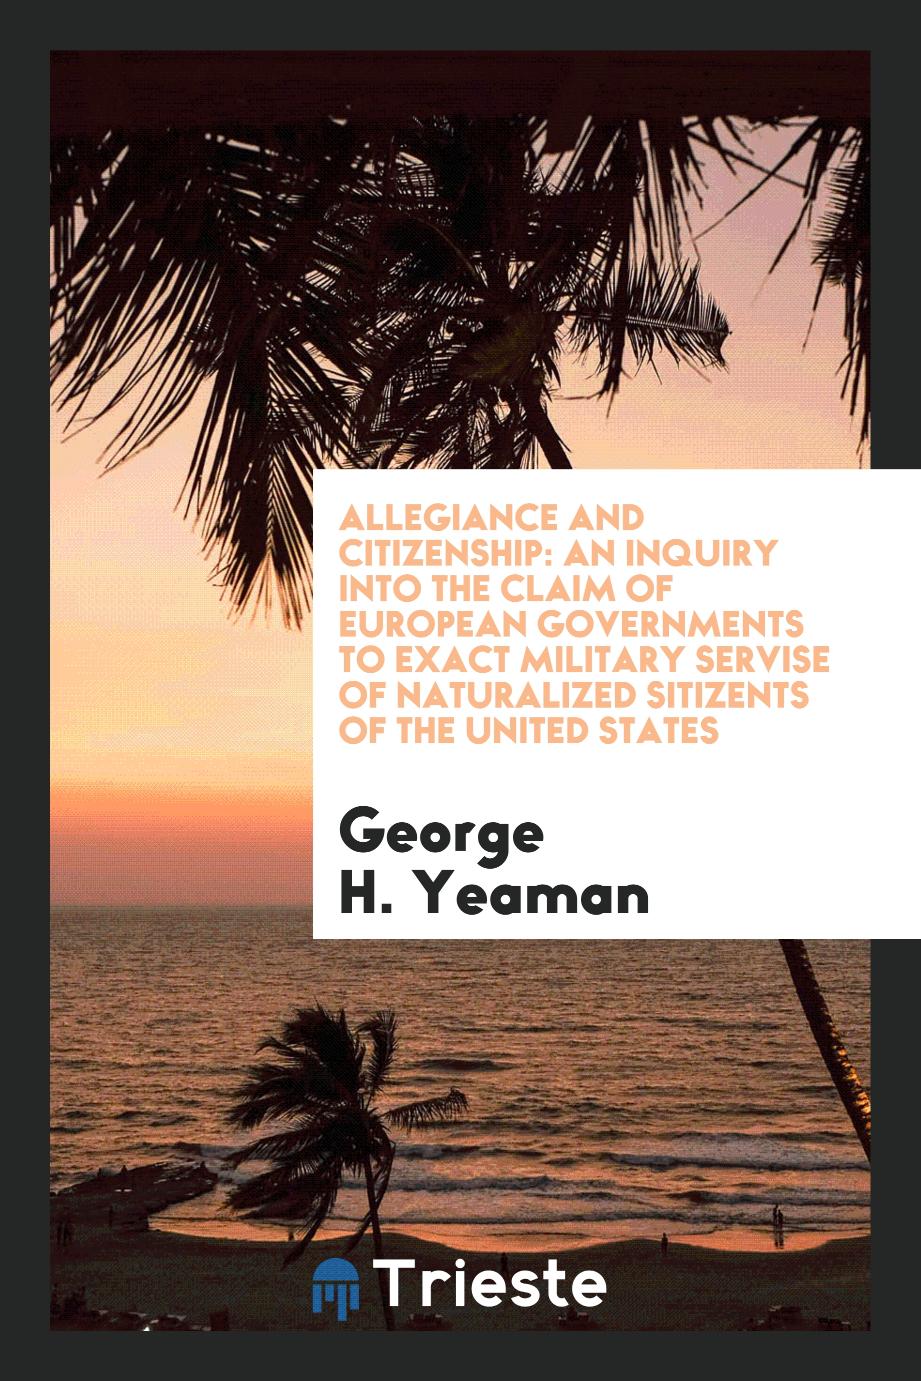 Allegiance and Citizenship: An Inquiry Into the Claim of European Governments to Exact Military servise of naturalized sitizents of the United States